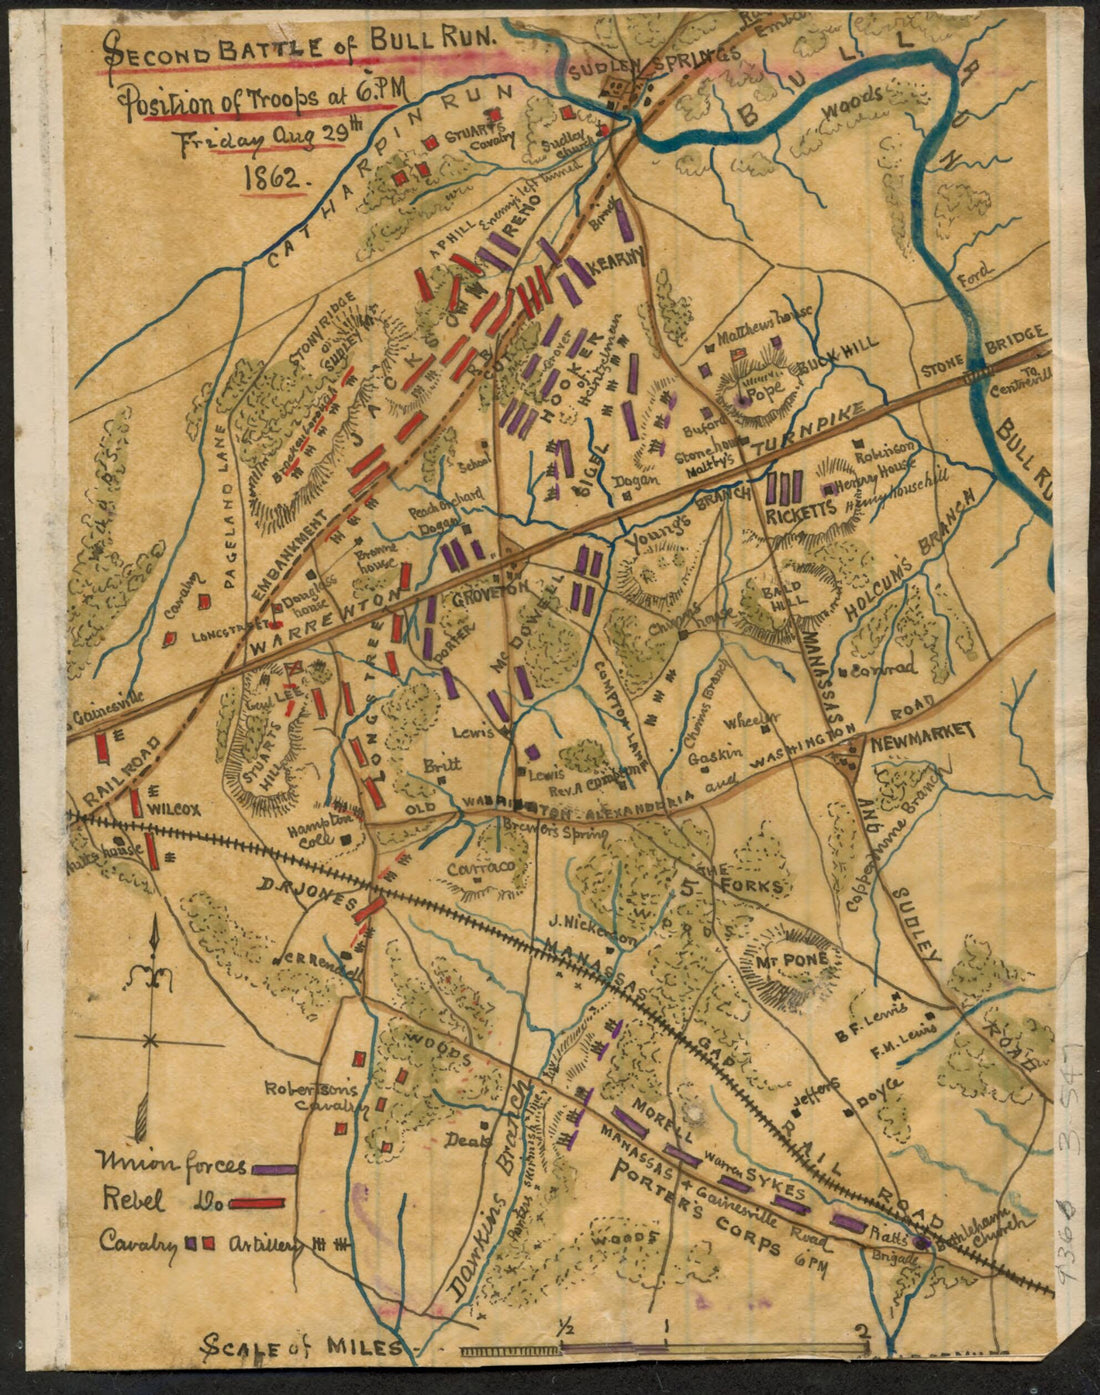 This old map of Second Battle of Bull Run Position of Troops at 6 P.m from 1862 was created by Robert Knox Sneden in 1862